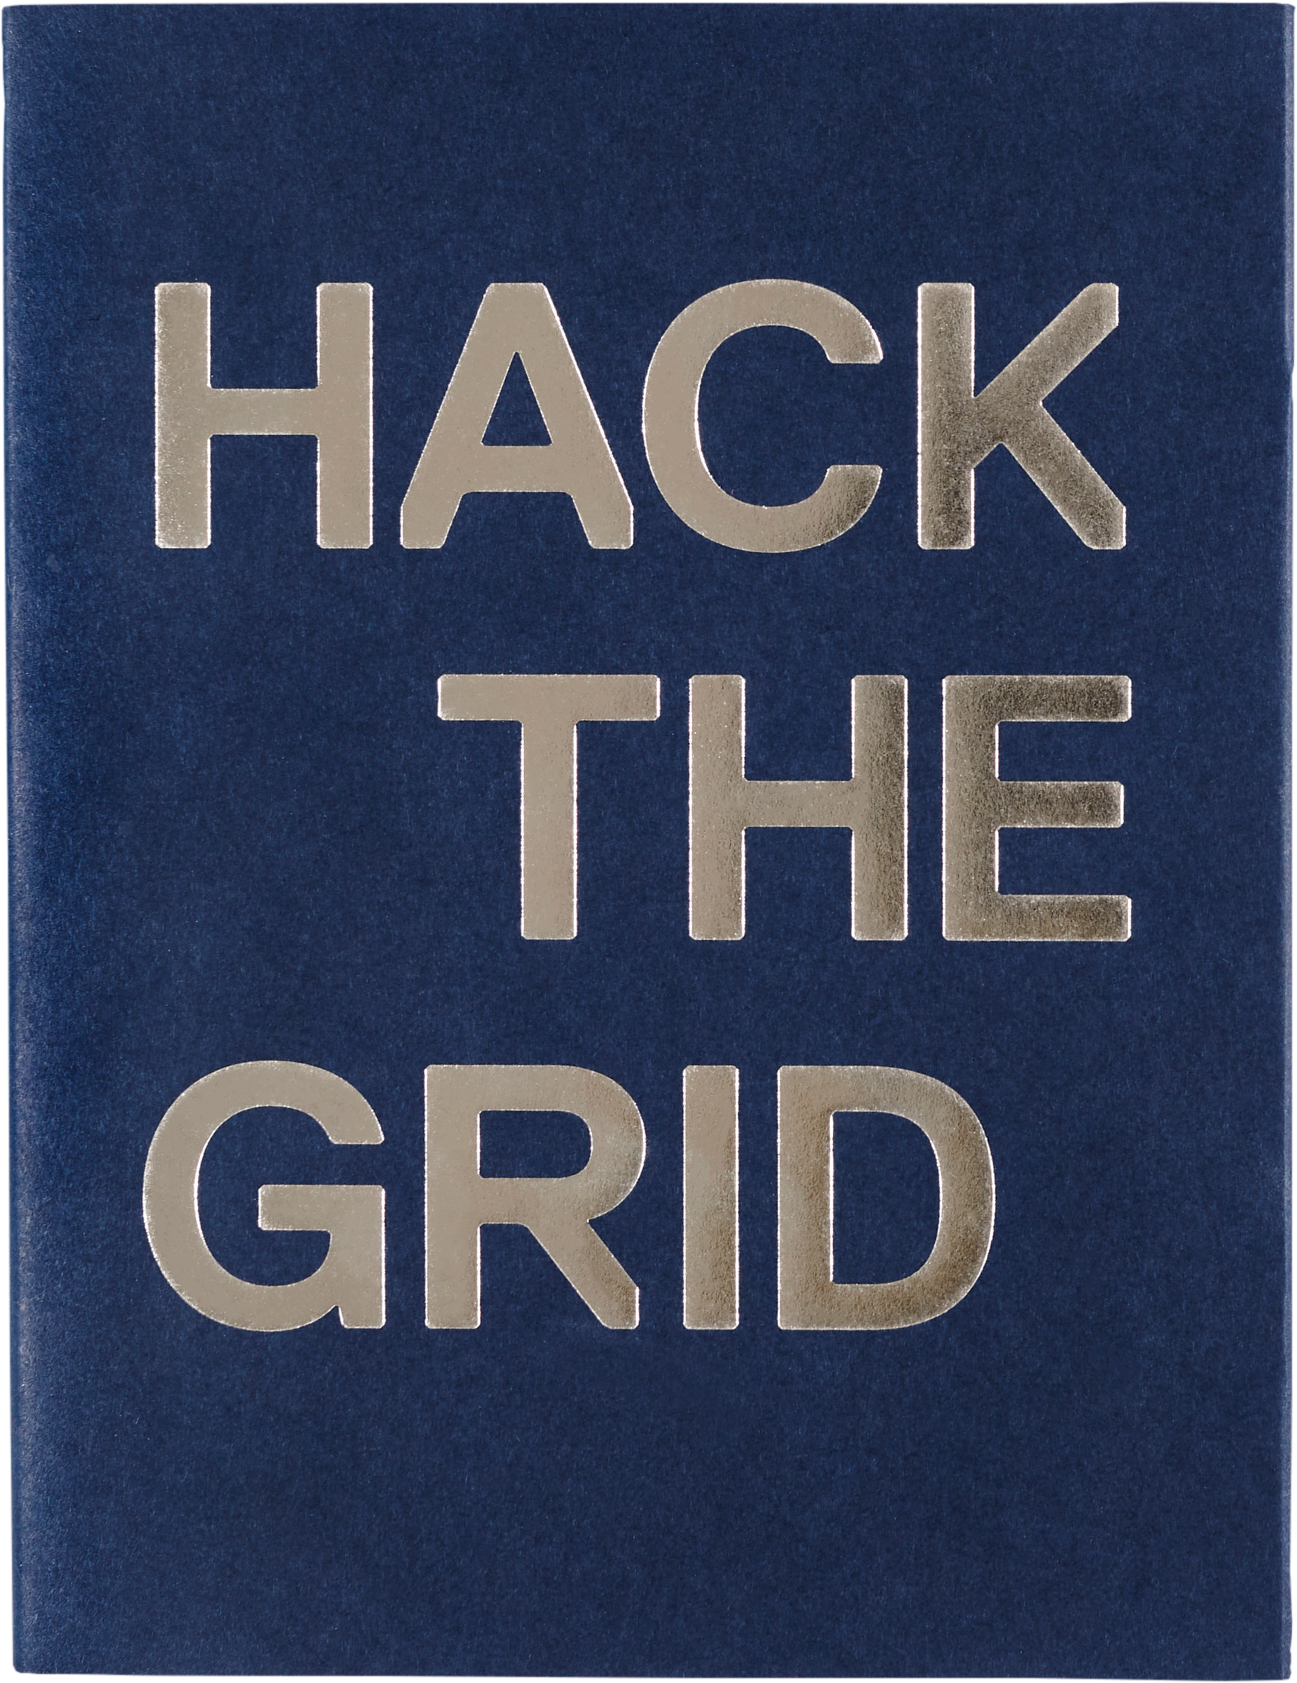 Blue book cover titled Hack the Grid